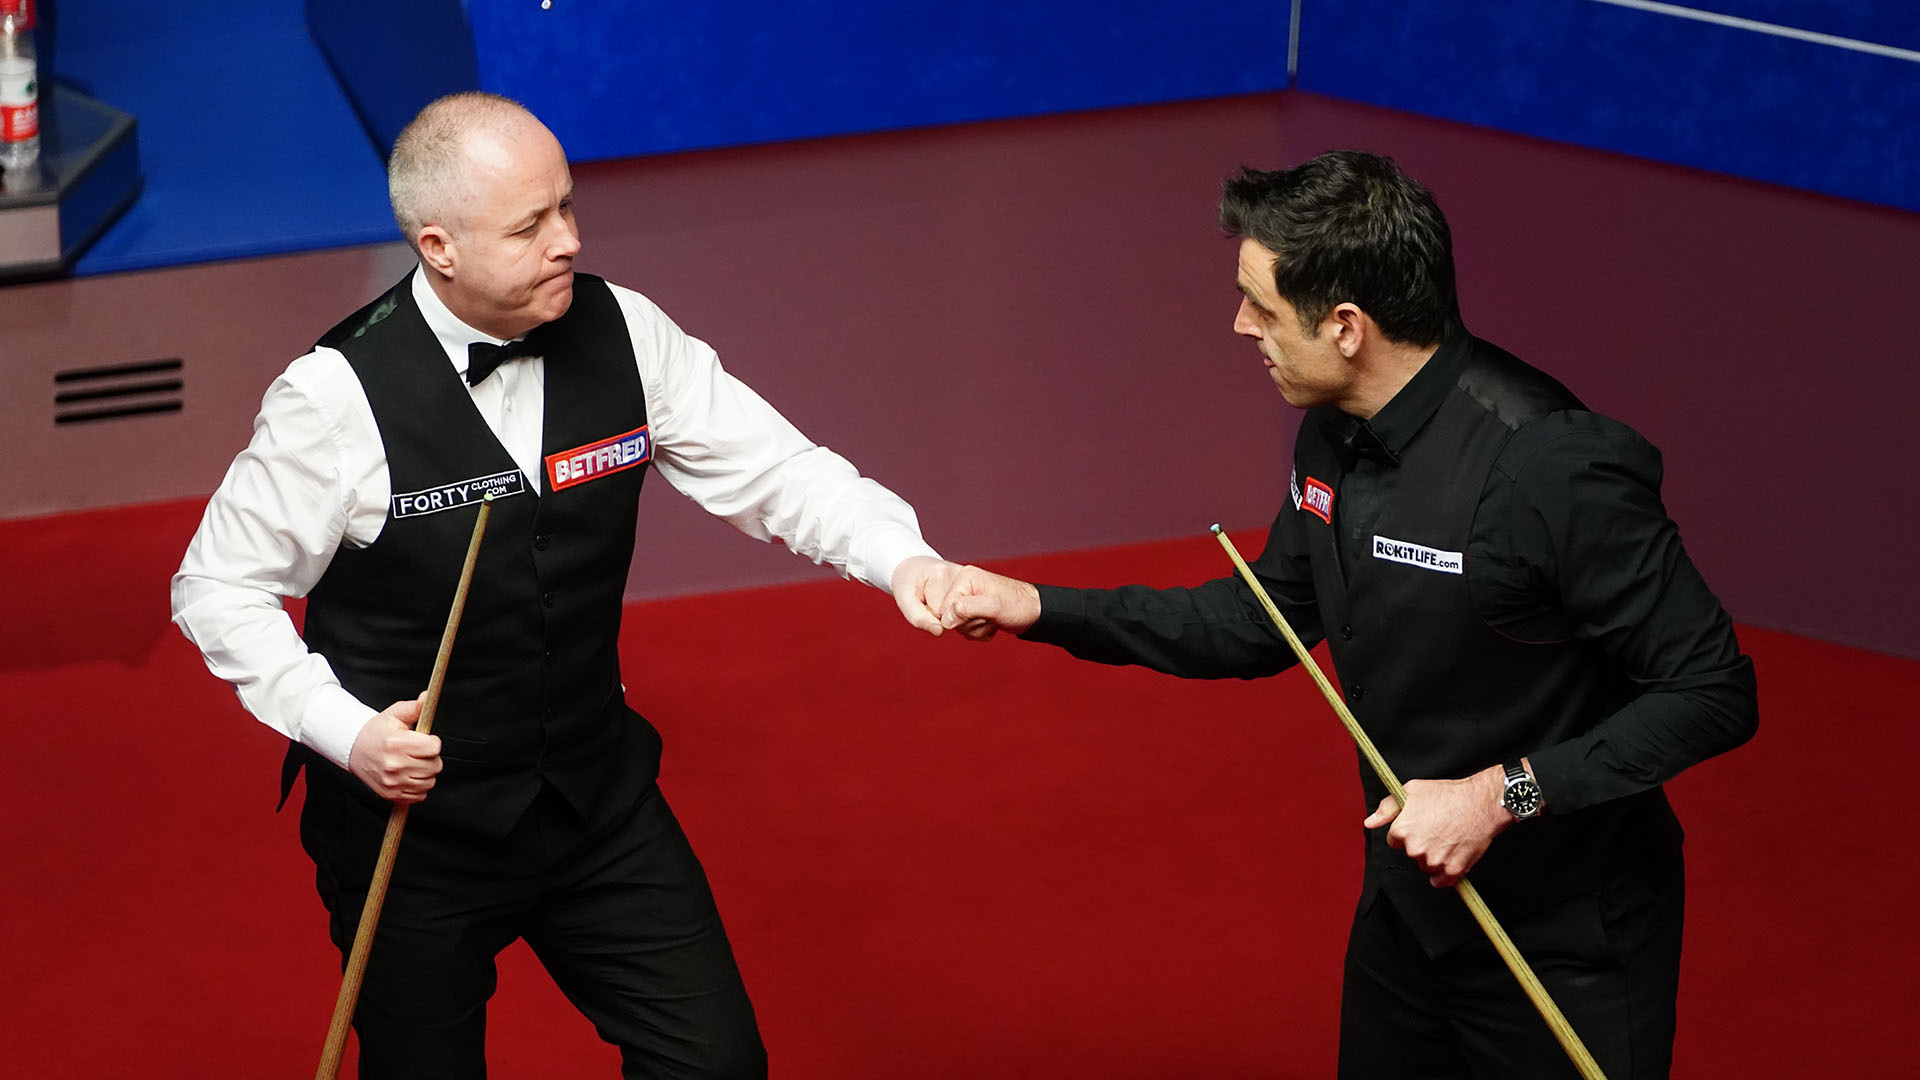 World Snooker results John Higgins v Ronnie OSullivan latest news and frame scores from the Crucible